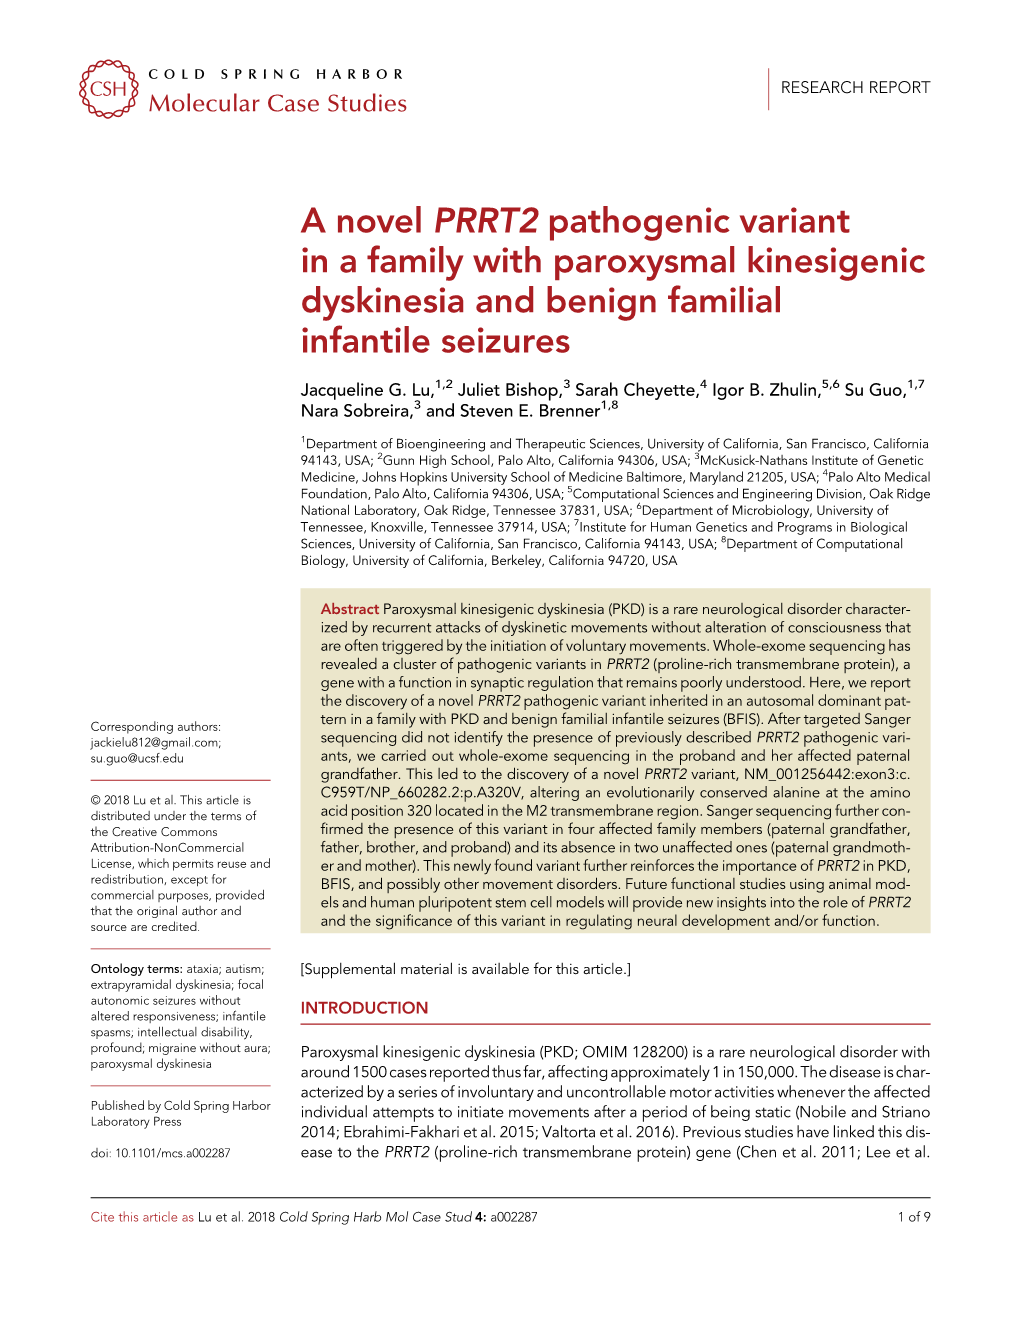 A Novel PRRT2 Pathogenic Variant in a Family with Paroxysmal